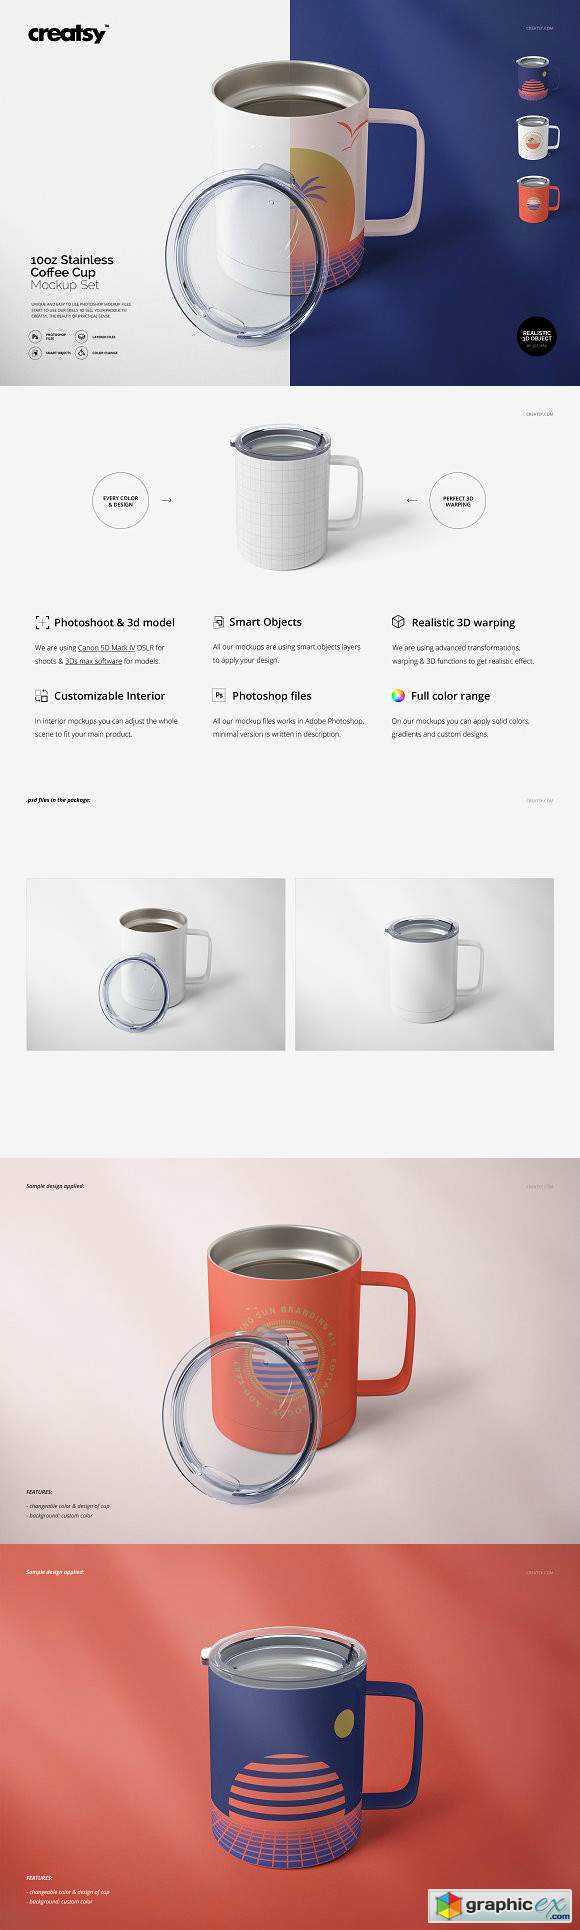 10oz Stainless Coffee Cup Mockup Set